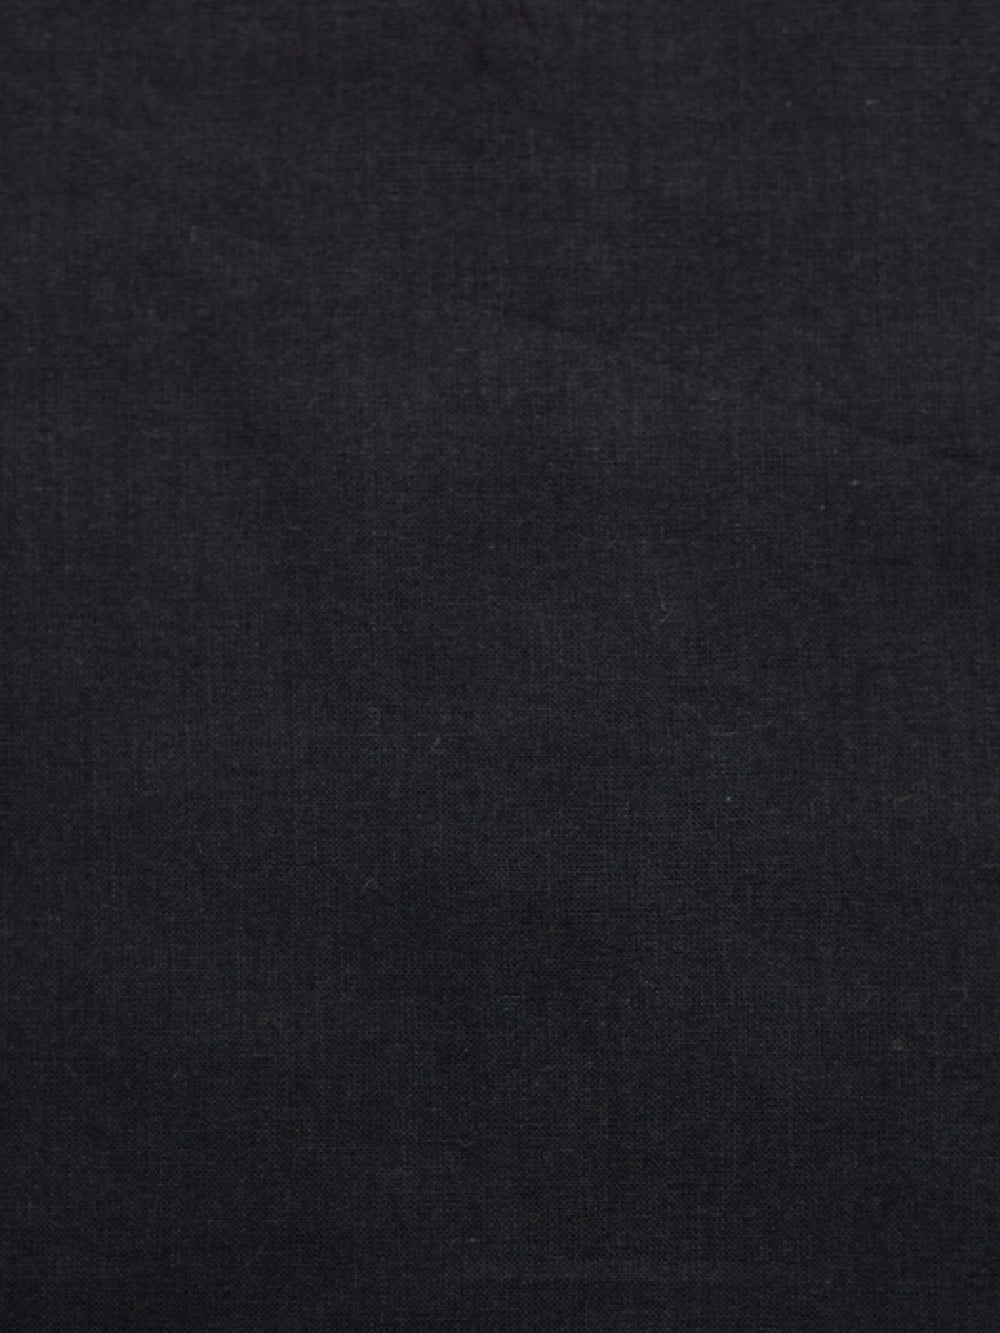 C-10 Black Shade Solid Dyed Cotton Cambric Fabric